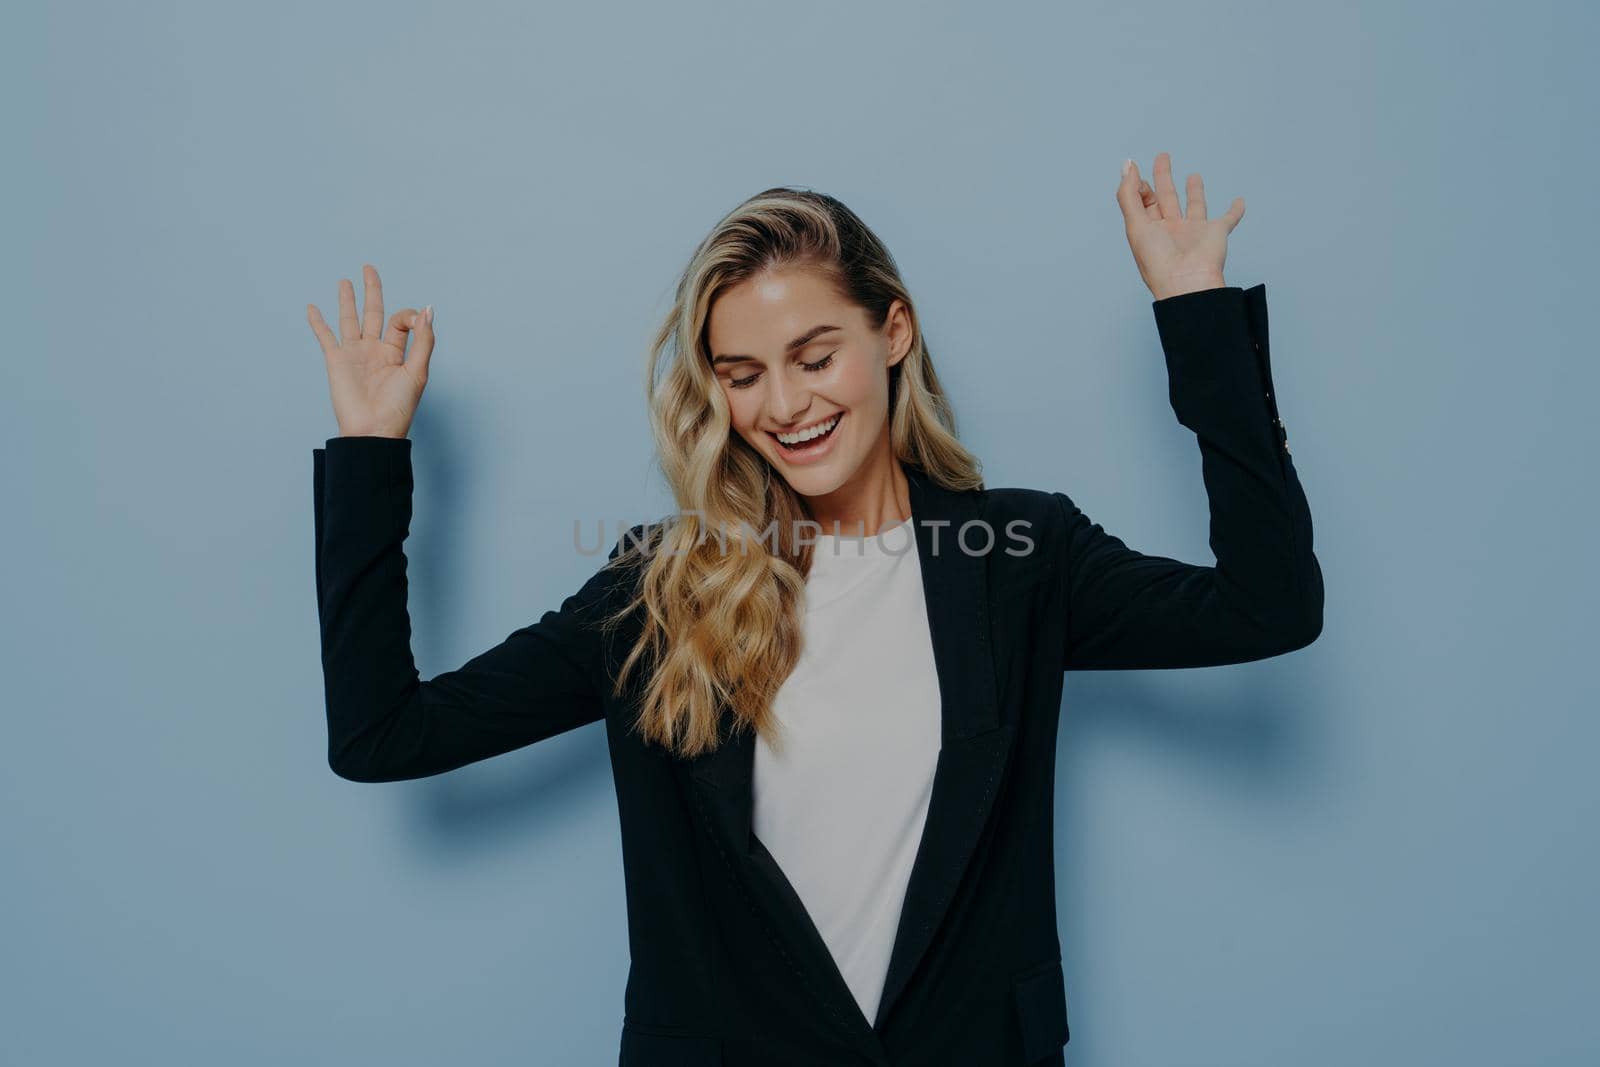 Carefree happy woman with blonde dyed hair raising her arms and dancing with closed eyes and smile on face by vkstock